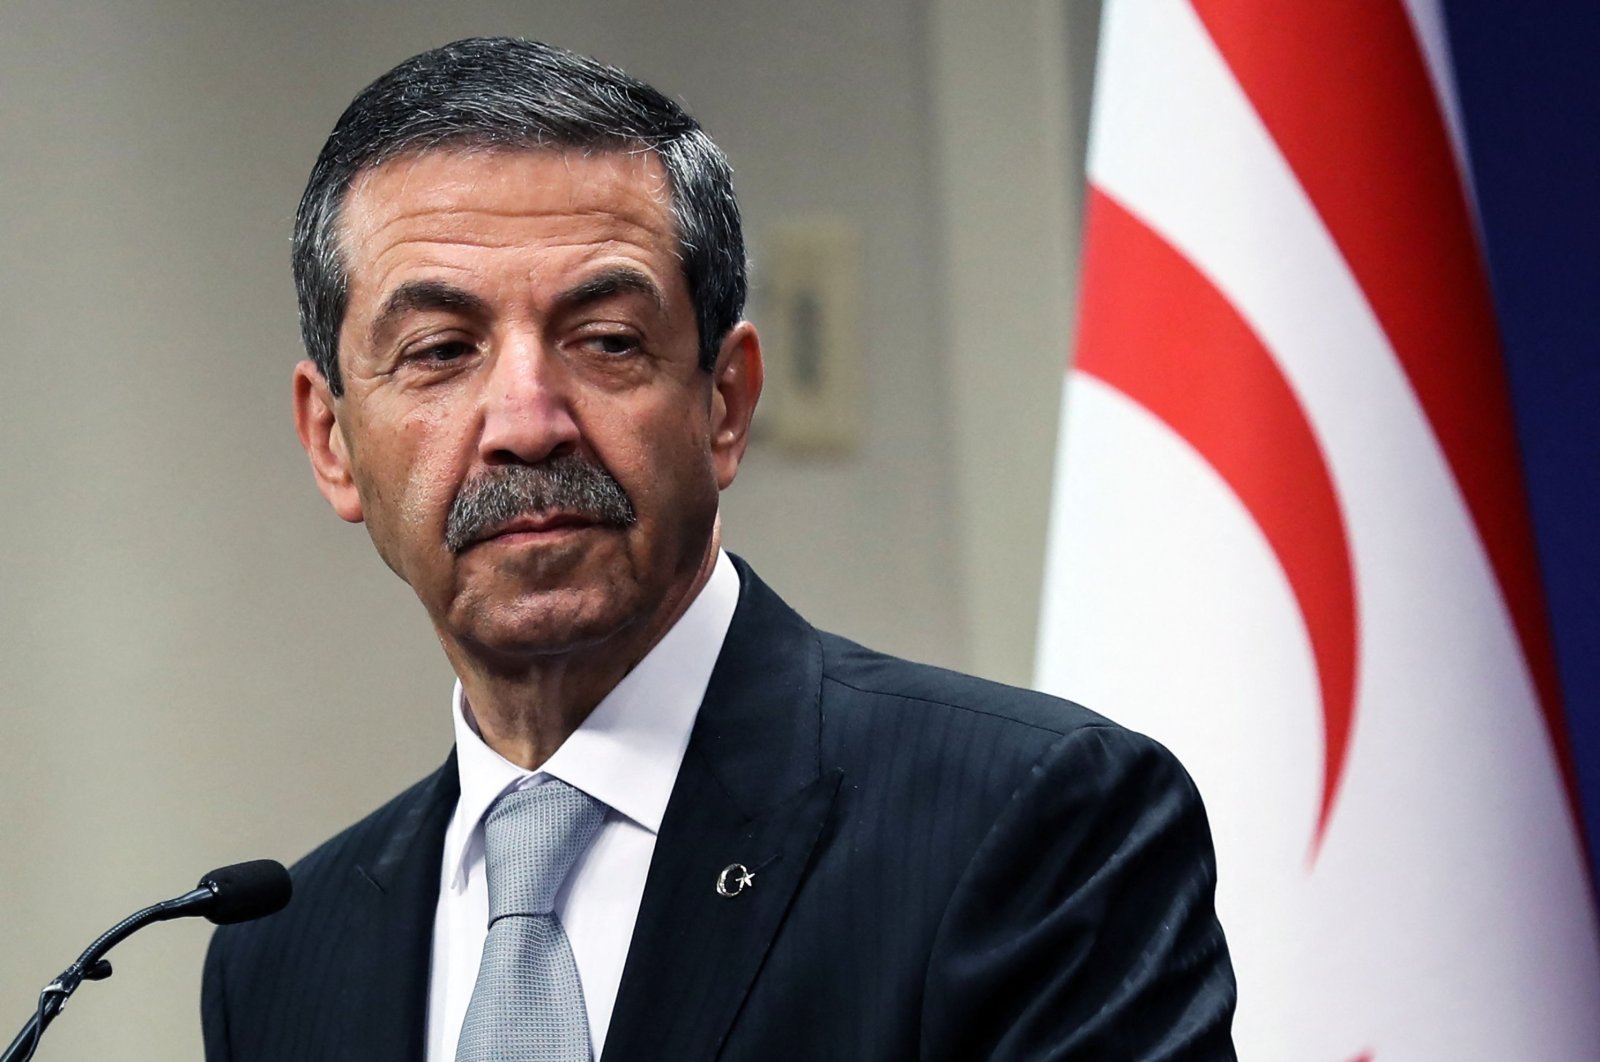 Minister of Foreign Affairs of the Turkish Republic of Northern Cyprus (TRNC) Tahsin Ertuğruloğlu speaks during a press conference in Ankara, Turkey, Jan. 11, 2021. (AFP File Photo)